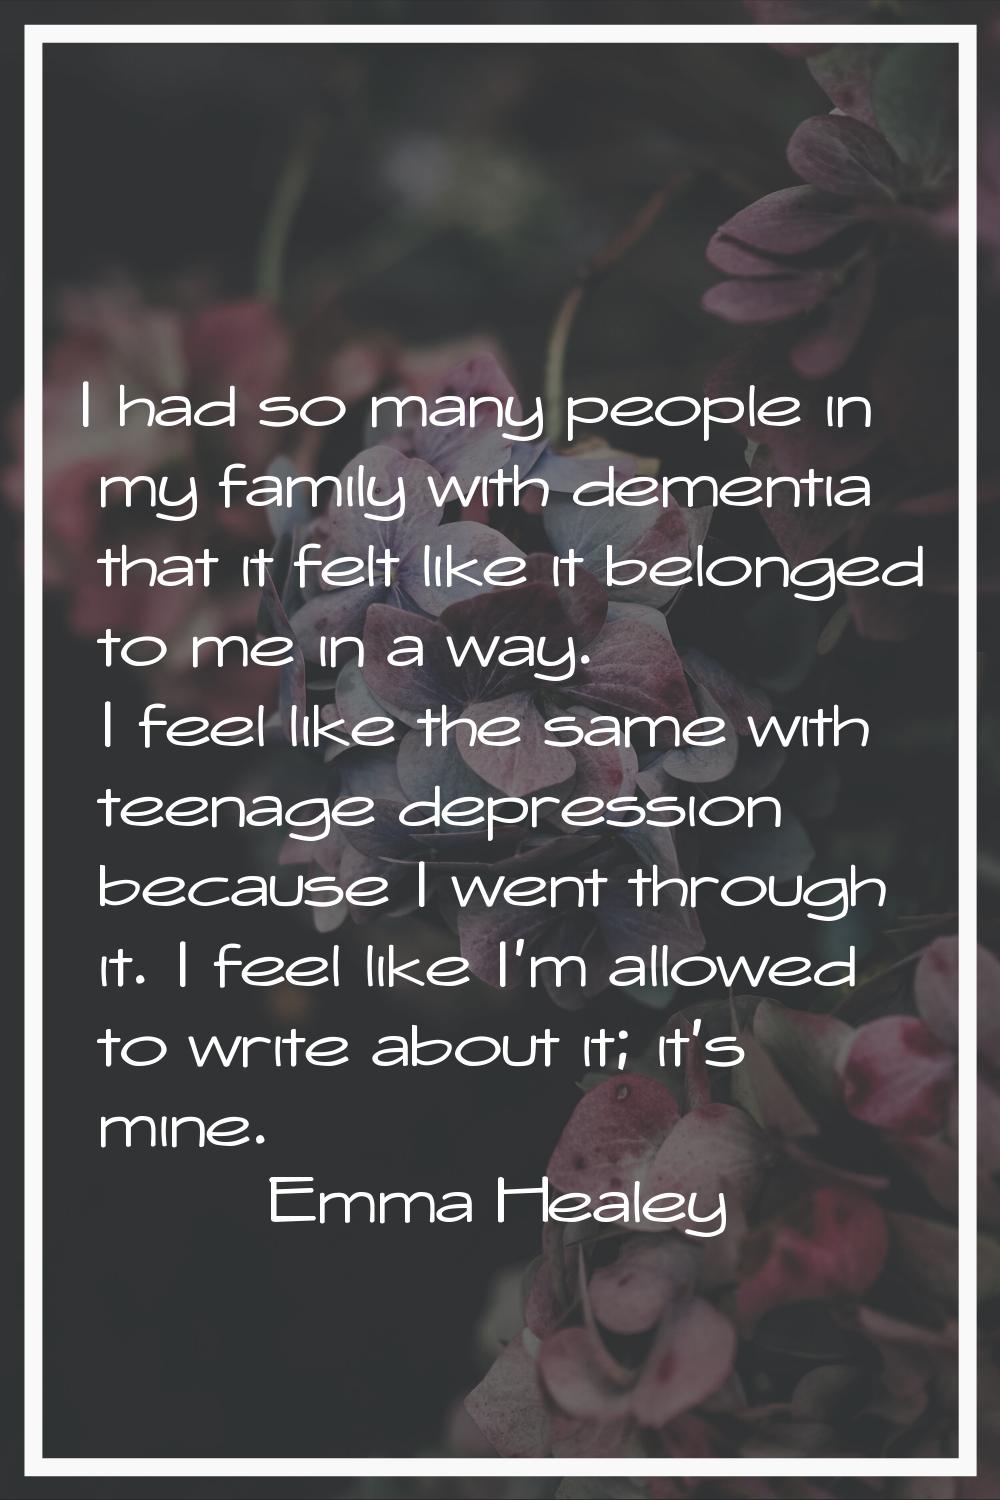 I had so many people in my family with dementia that it felt like it belonged to me in a way. I fee